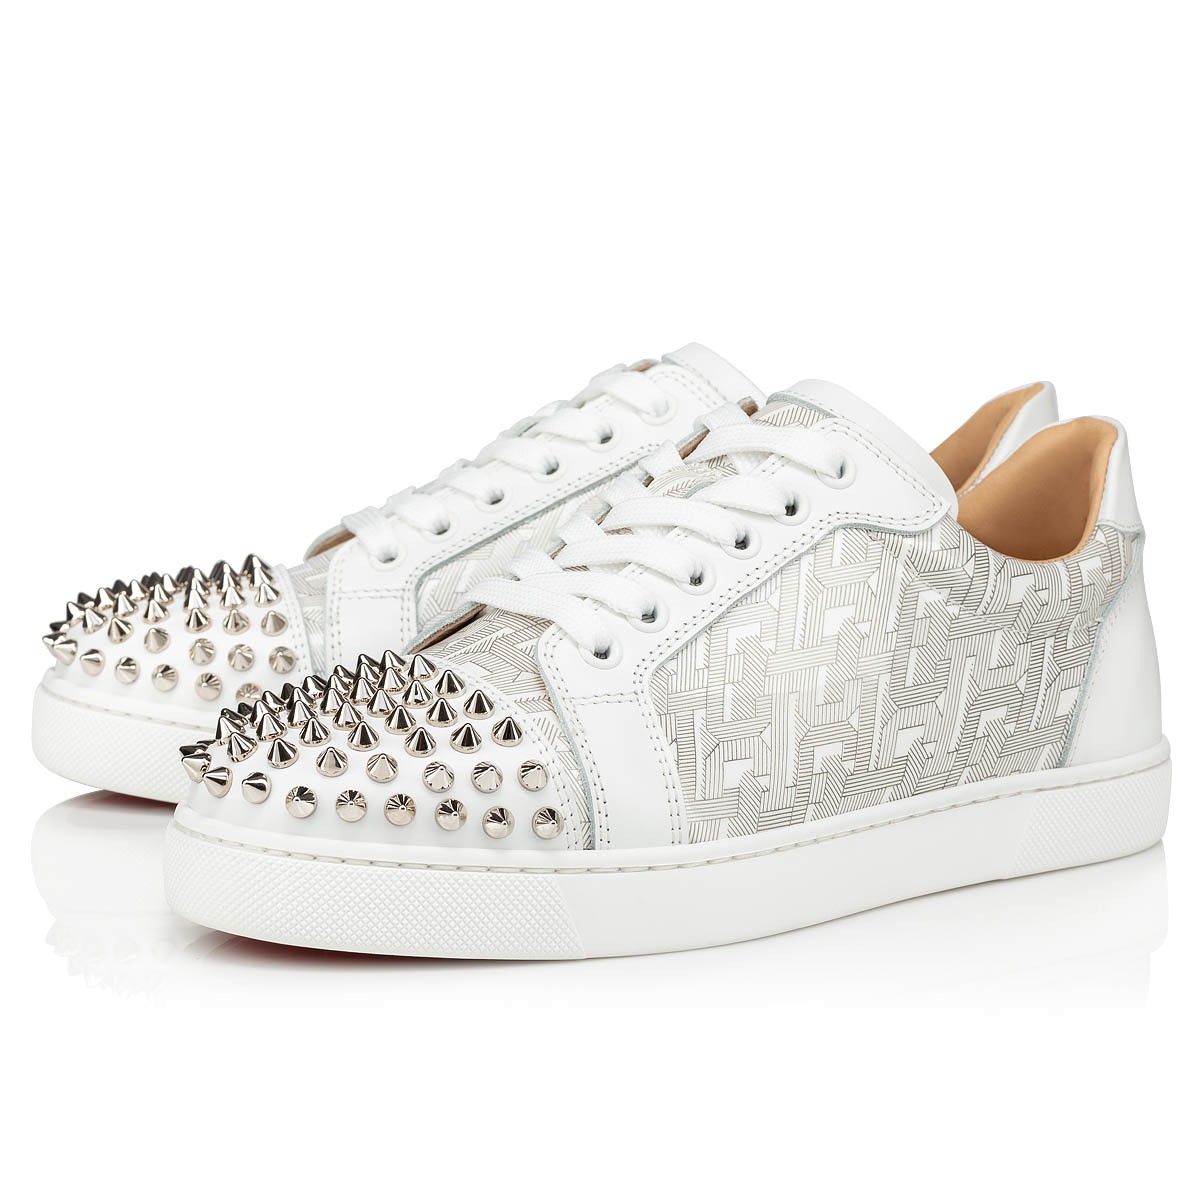 womens louboutin trainers, OFF 74%,Free 